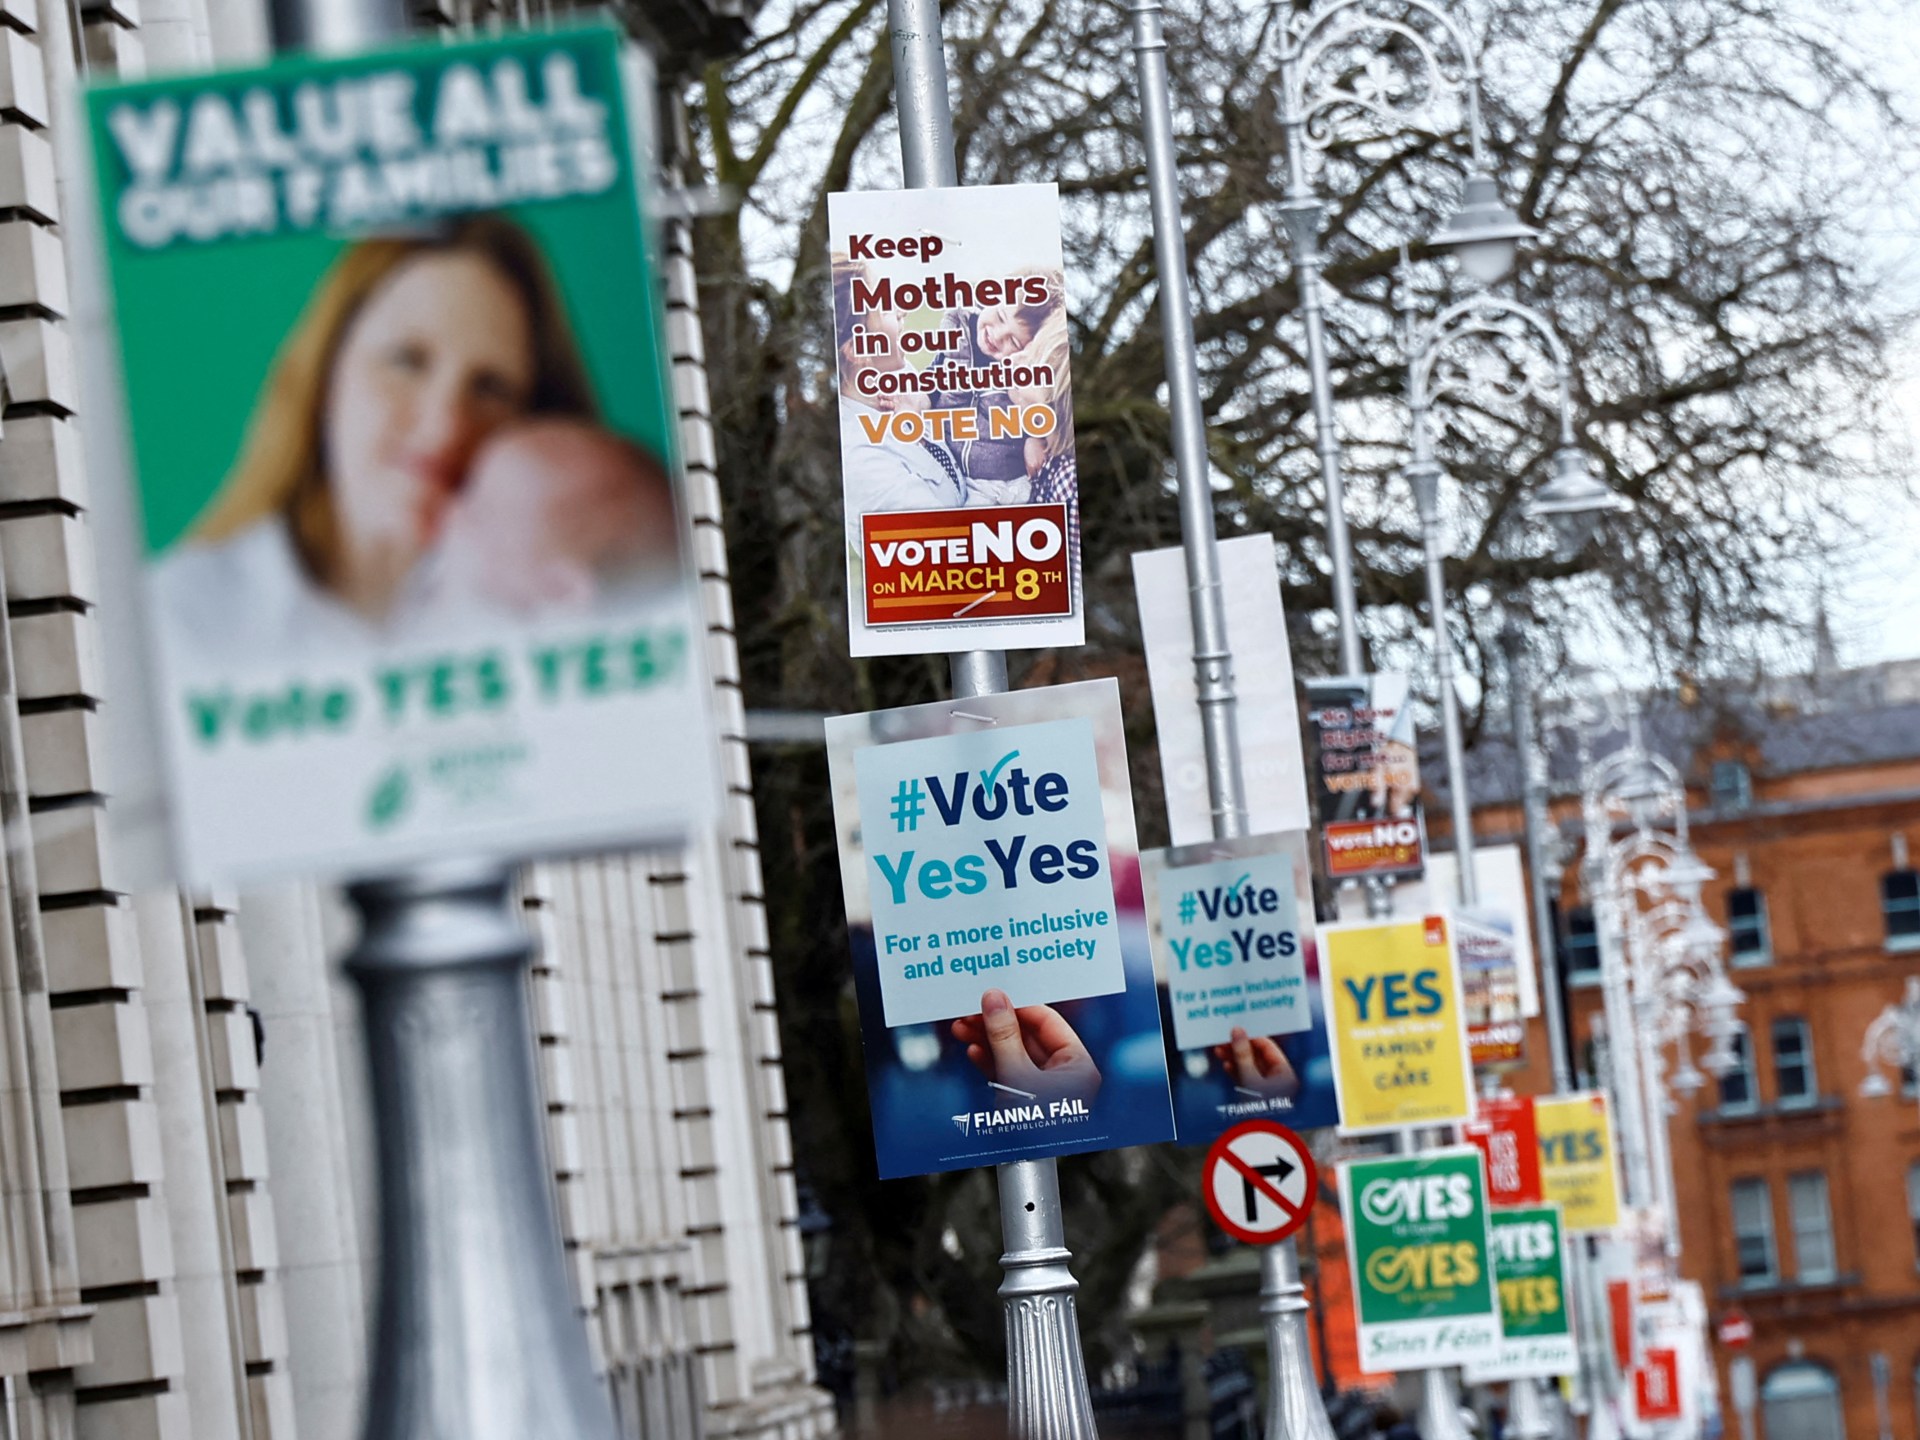 Ireland votes in ‘women in the home’, ‘makeup of family’ referendums | Women’s Rights News